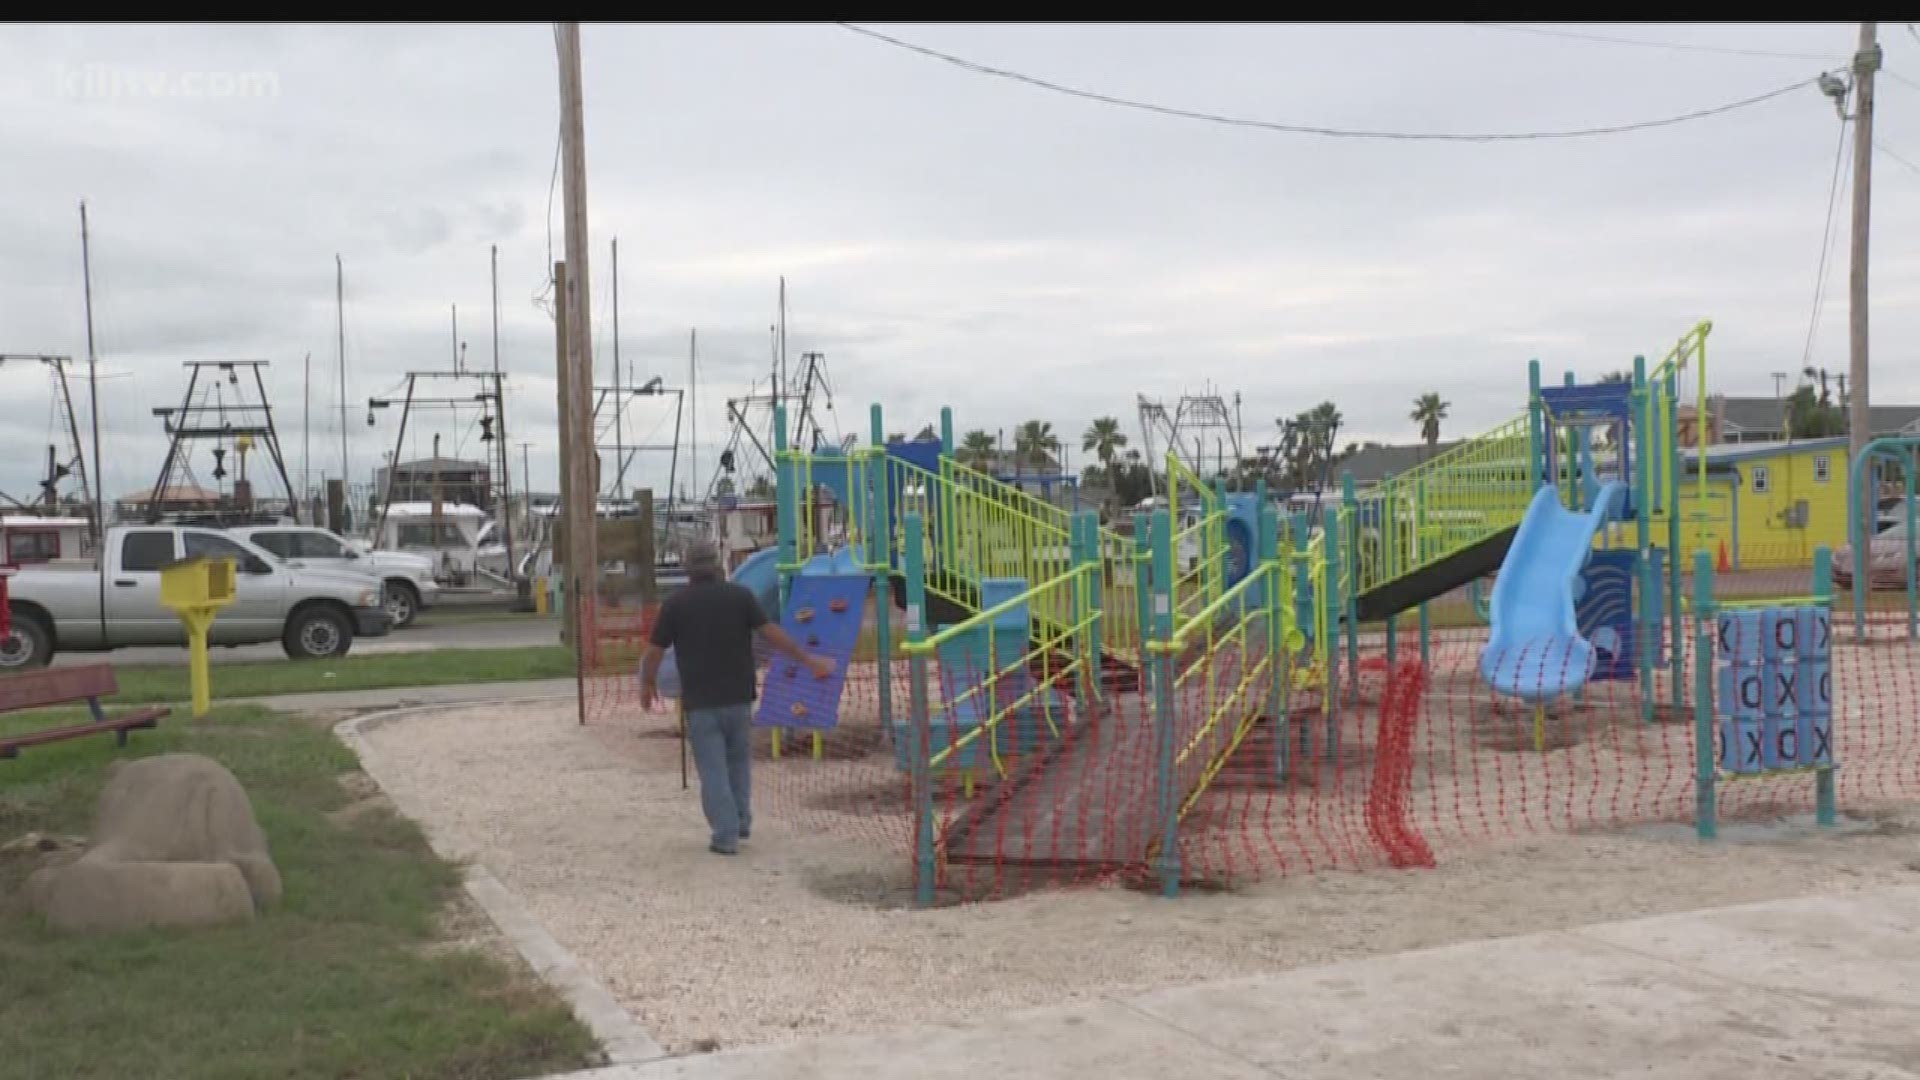 The businesses contributed around $150,000 to equip the new park located at the city's public fishing pier.